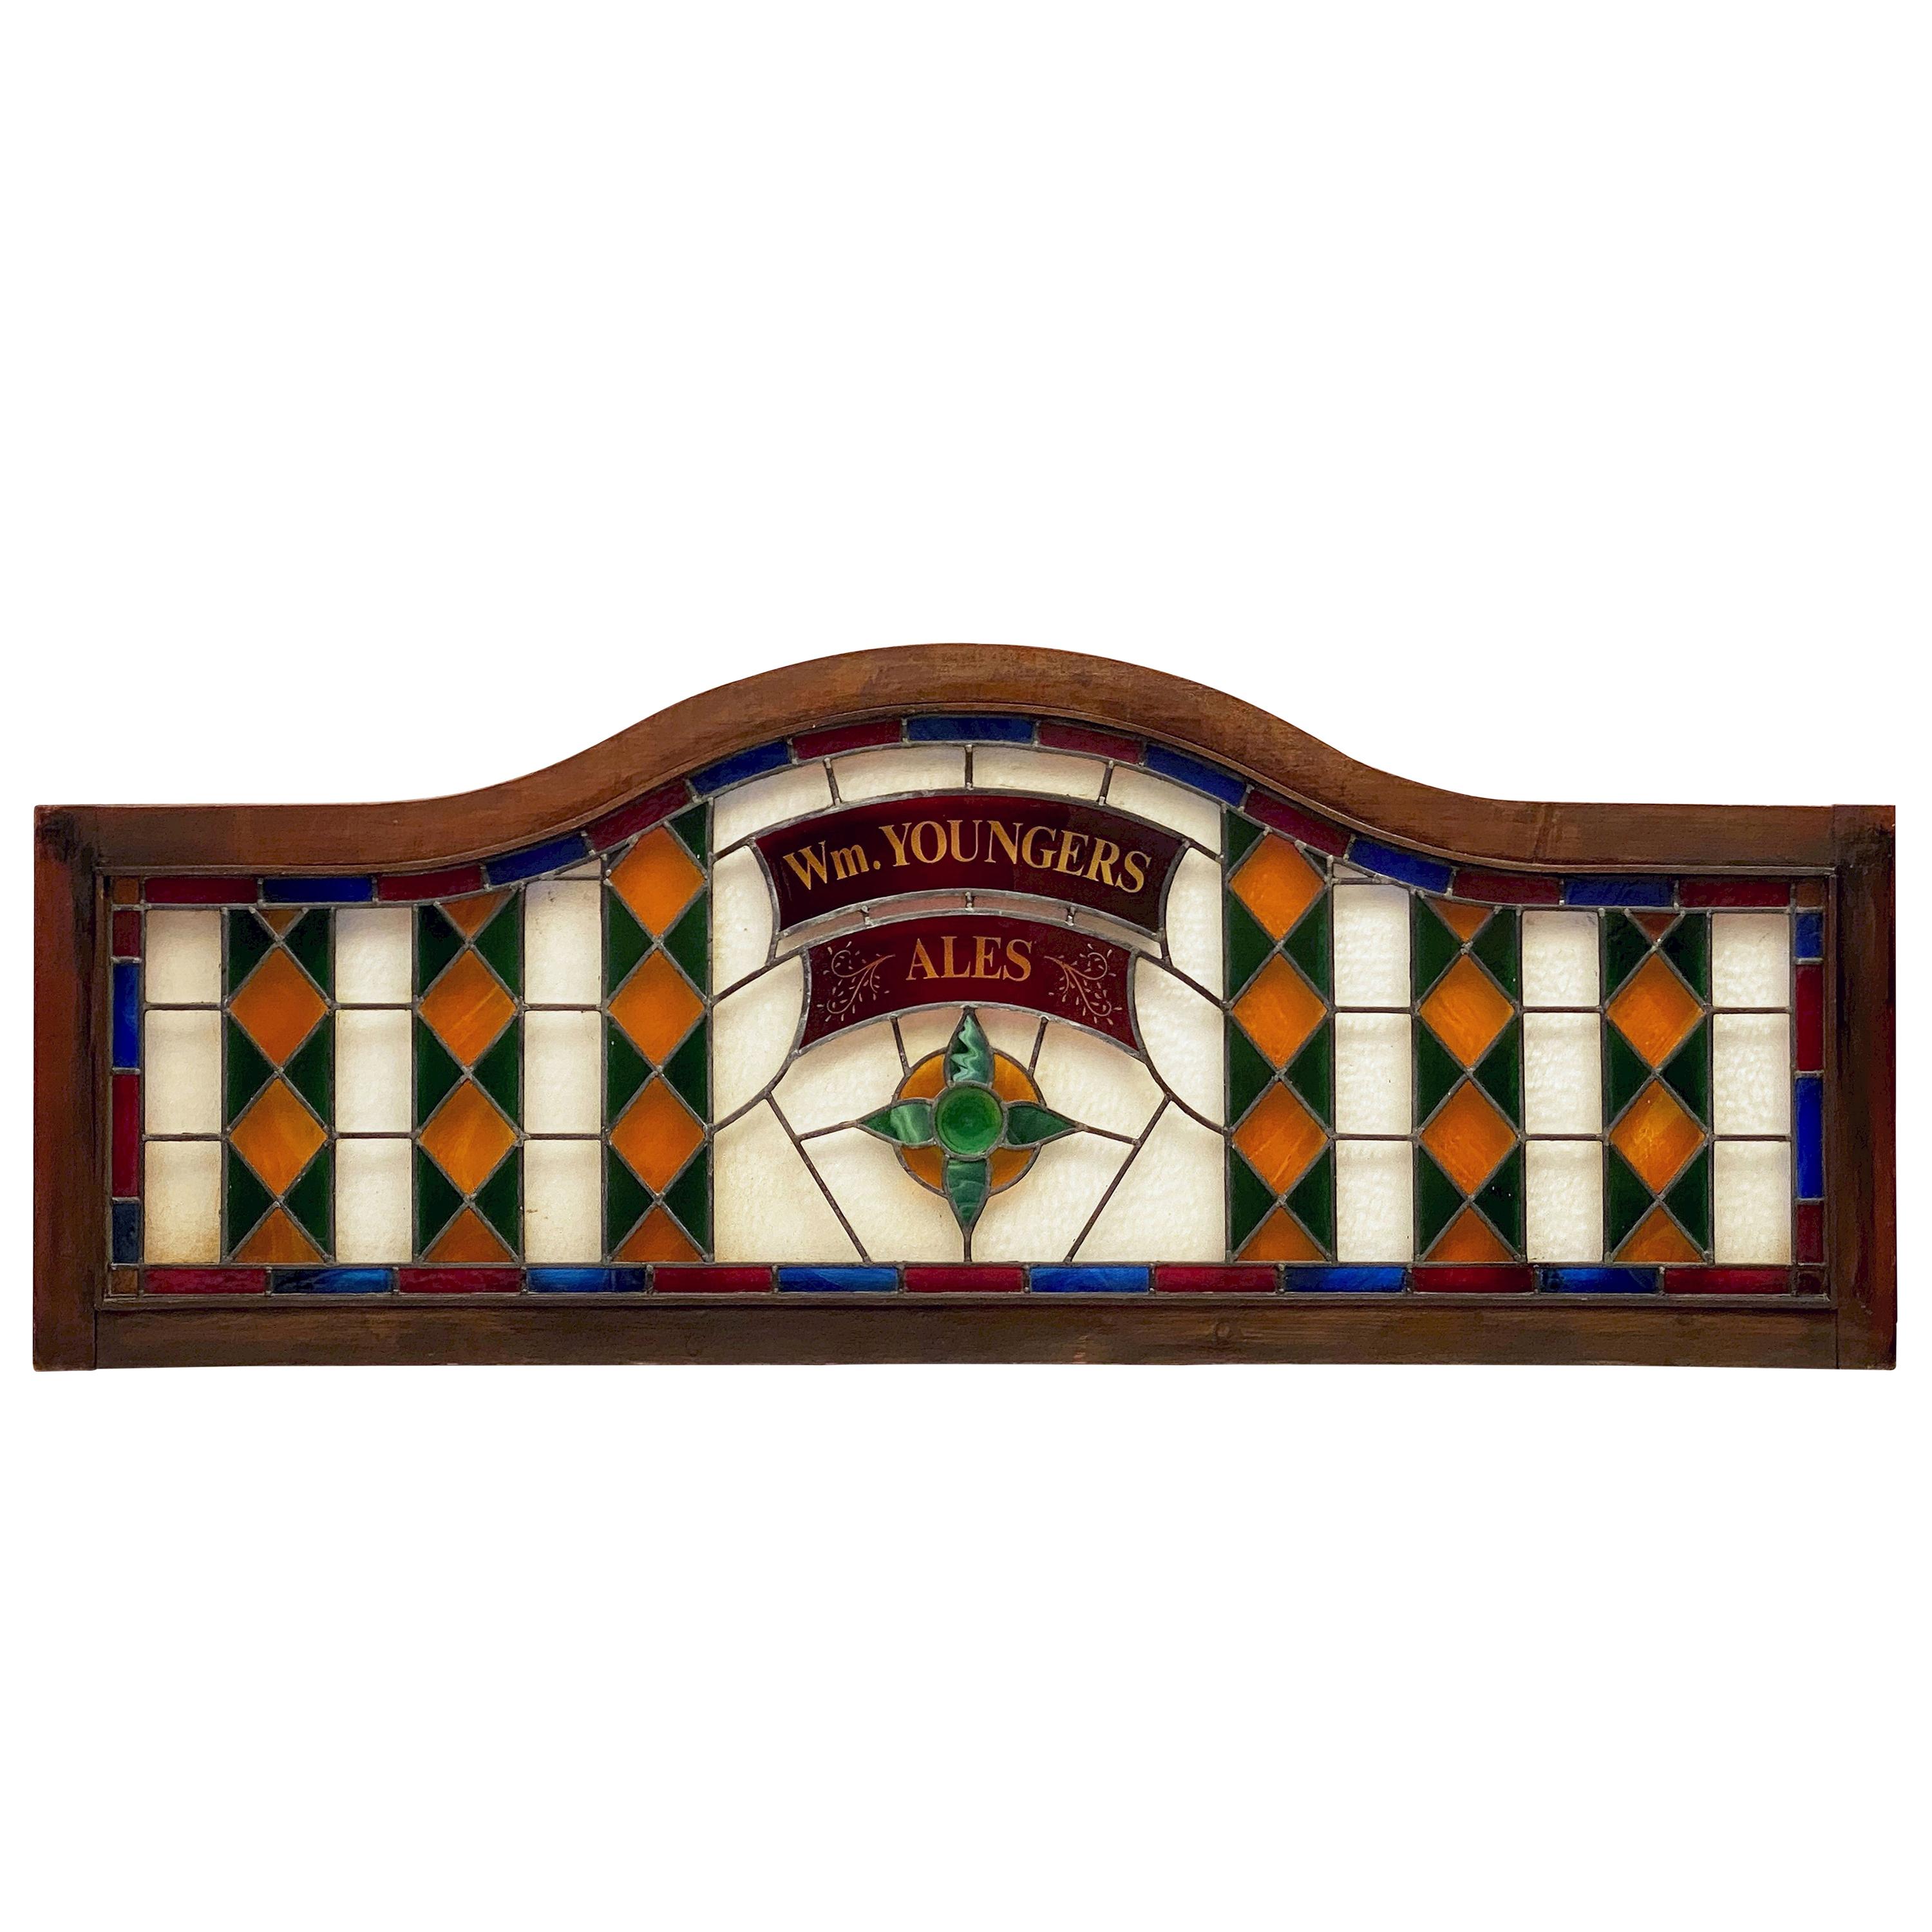 Large Wm. Youngers Ales Stained Glass Pub Sign from Scotland For Sale